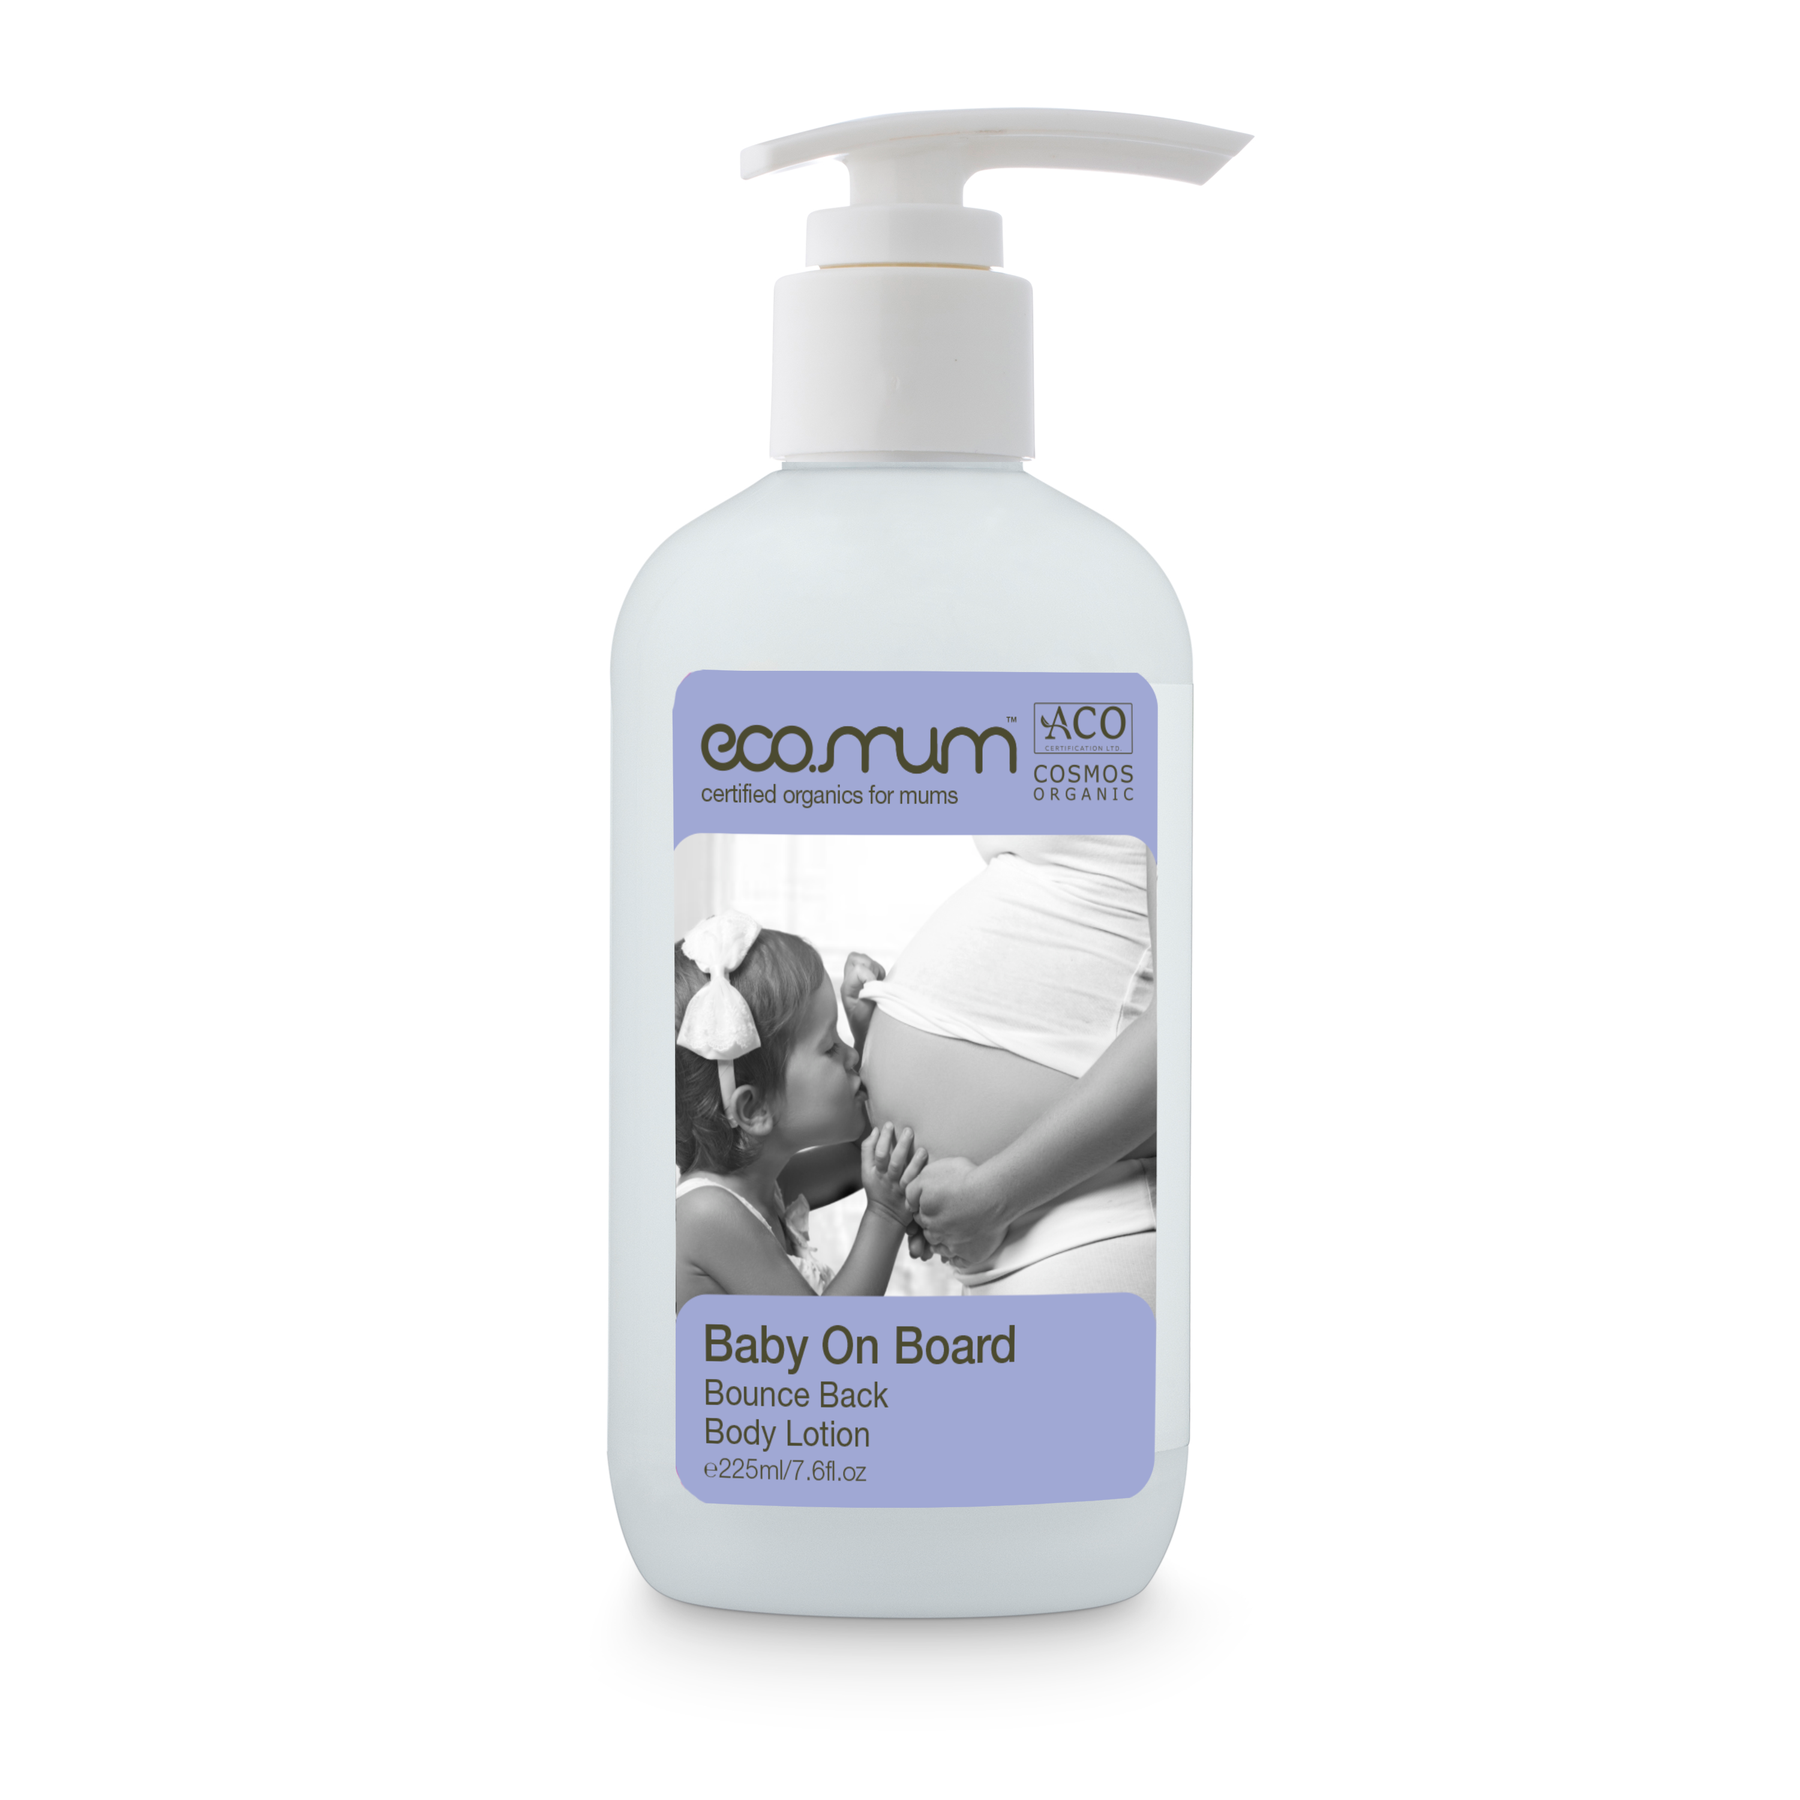 Baby on Board Bounce Back Body Lotion